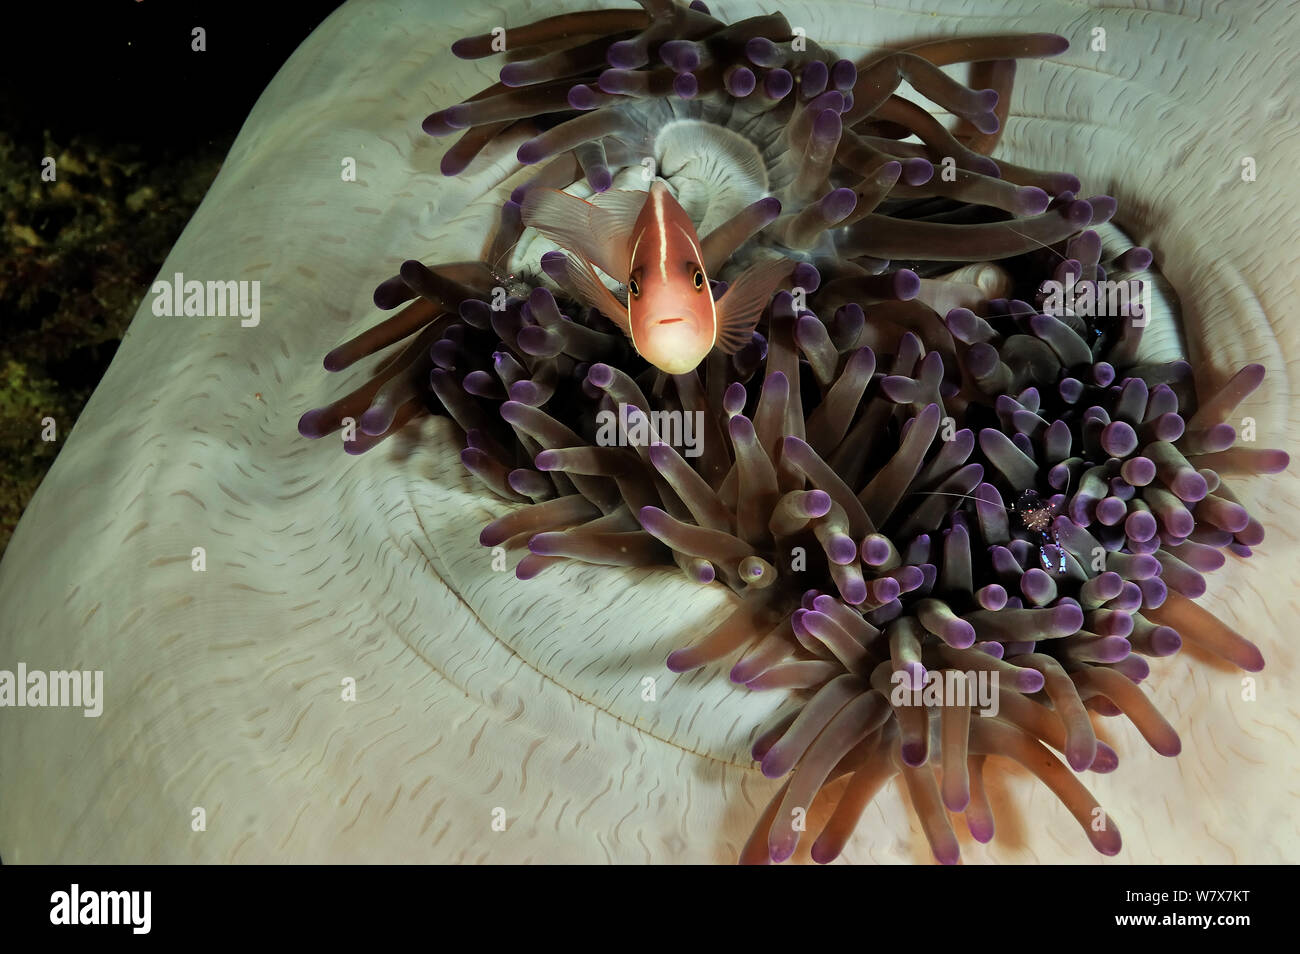 Pink anemonefish (Amphiprion perideraion) in Magnificent sea anemone (Heteractis magnifica) with Holthuis commensal shrimps (Periclimenes holthuisi) Philippines. Sulu Sea. Stock Photo